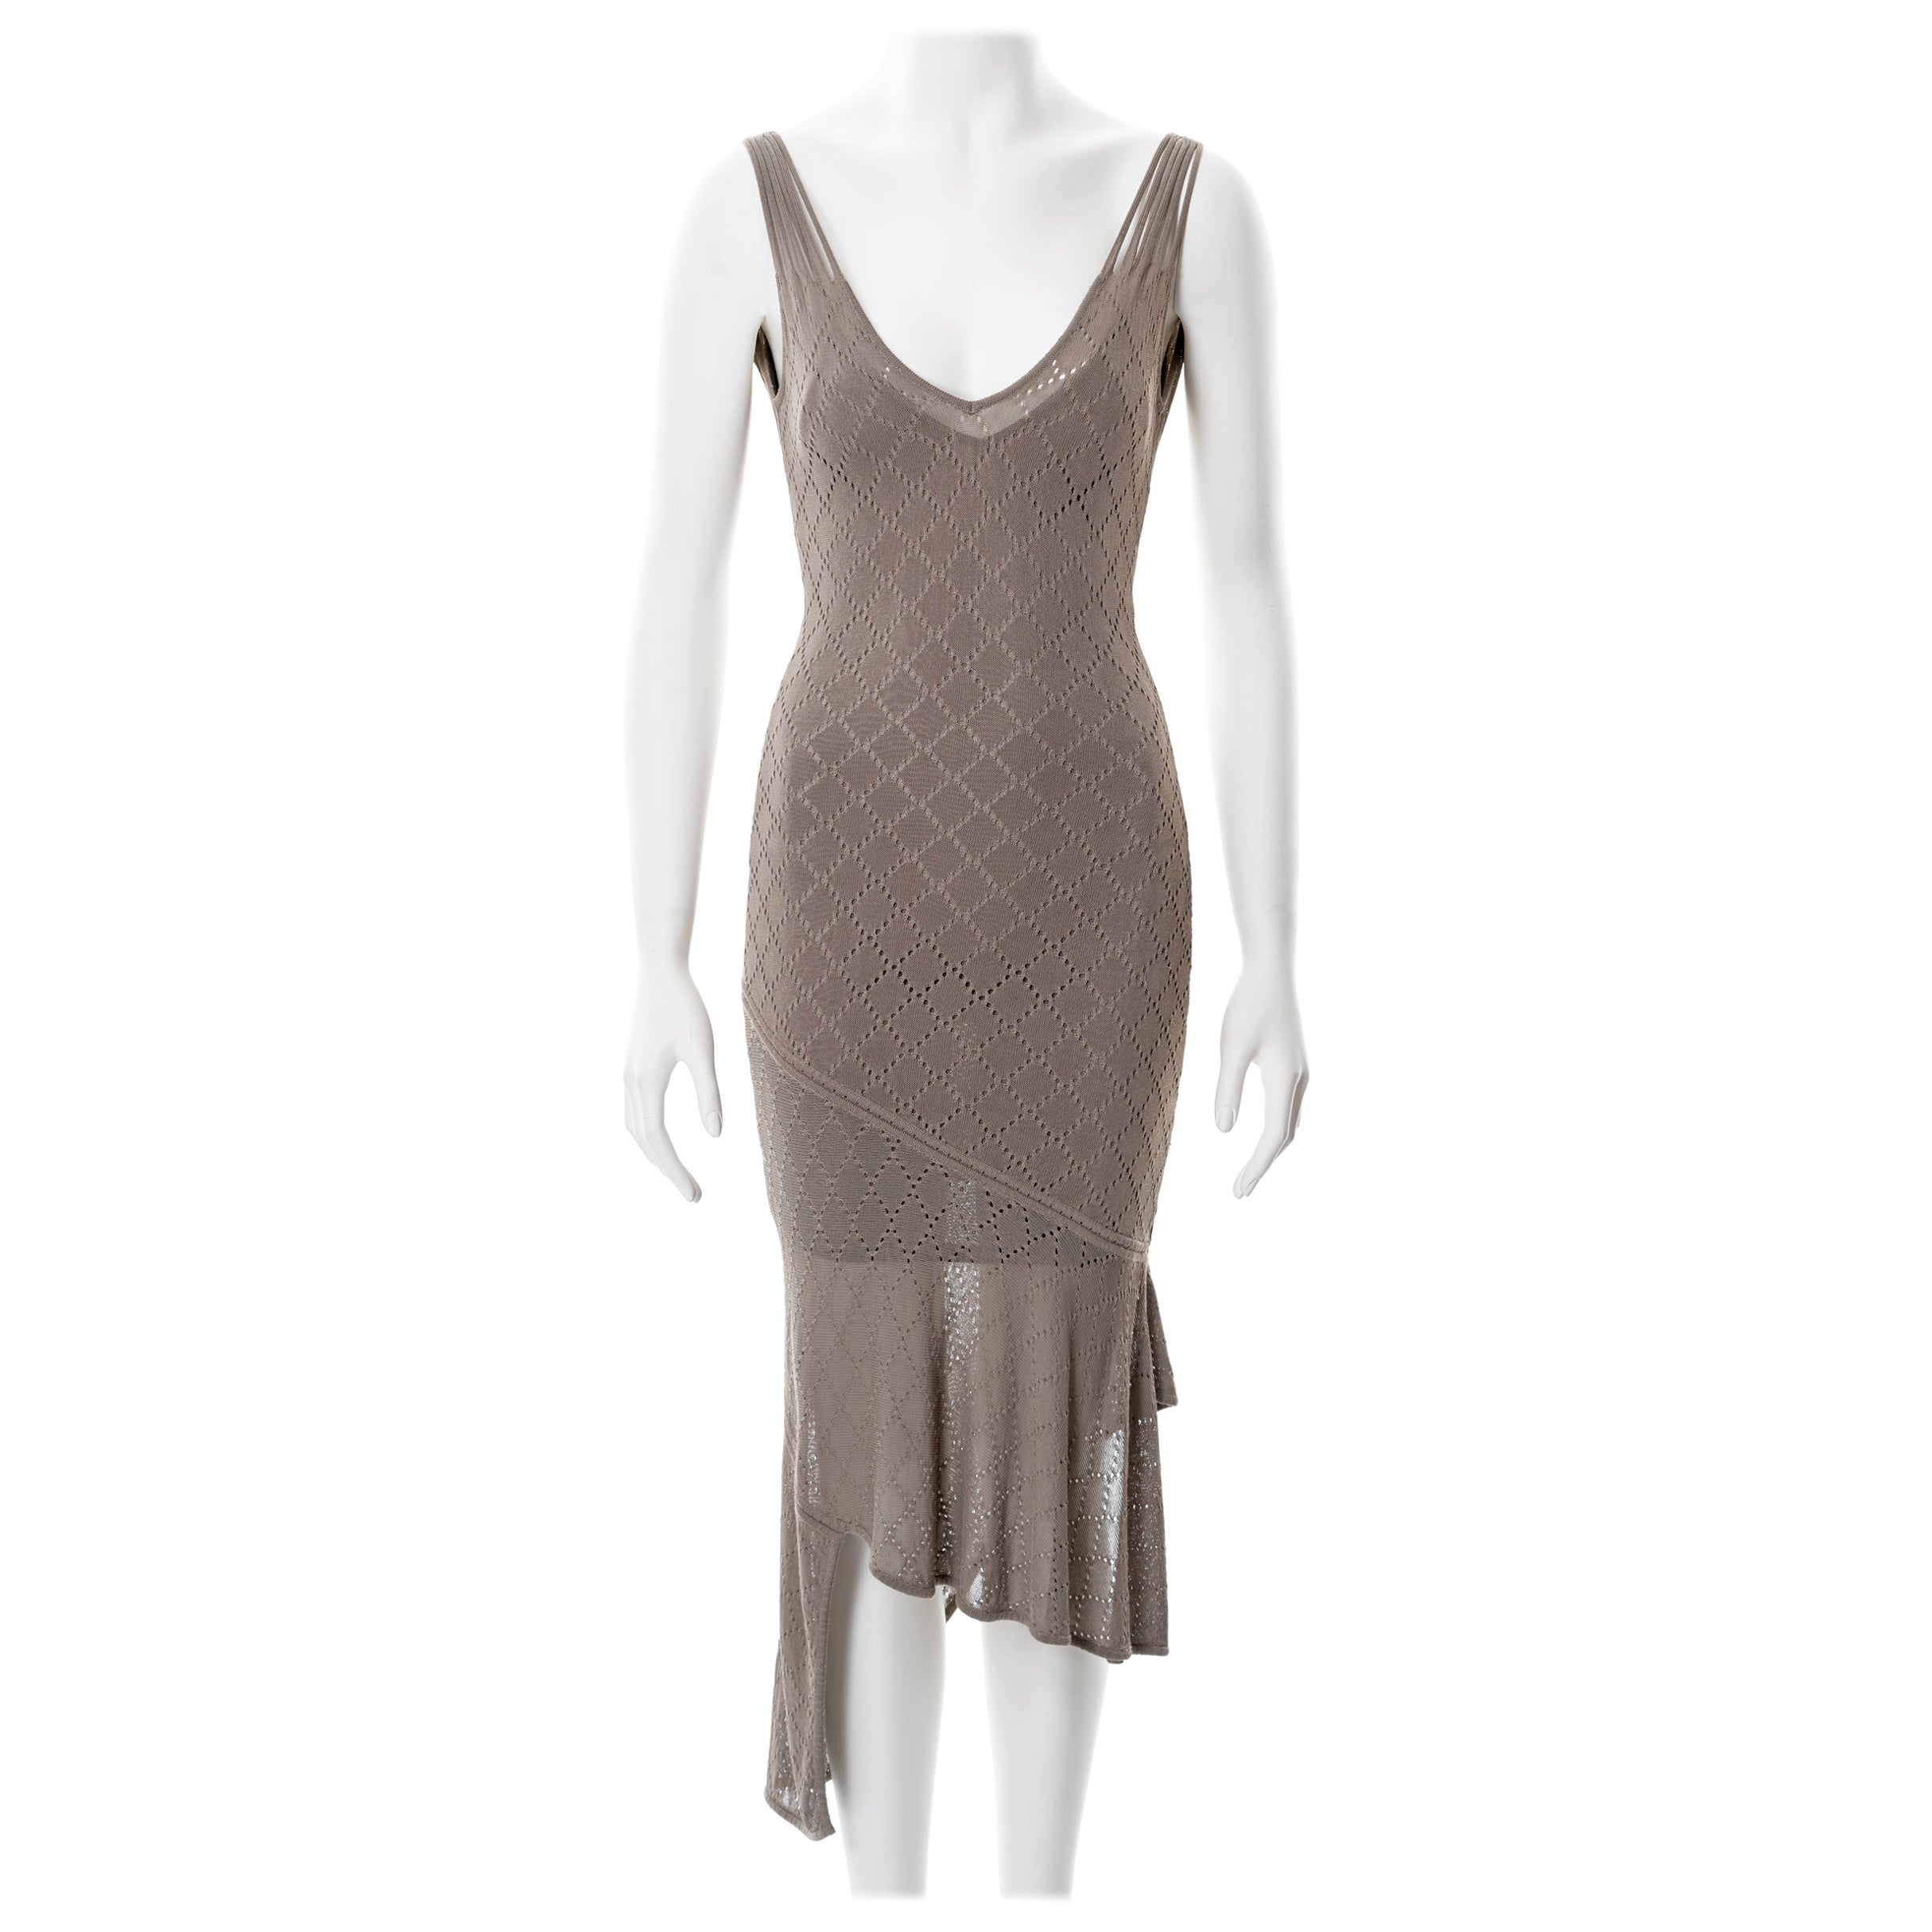 Christian Dior by John Galliano taupe open-knit dress, ss 2001